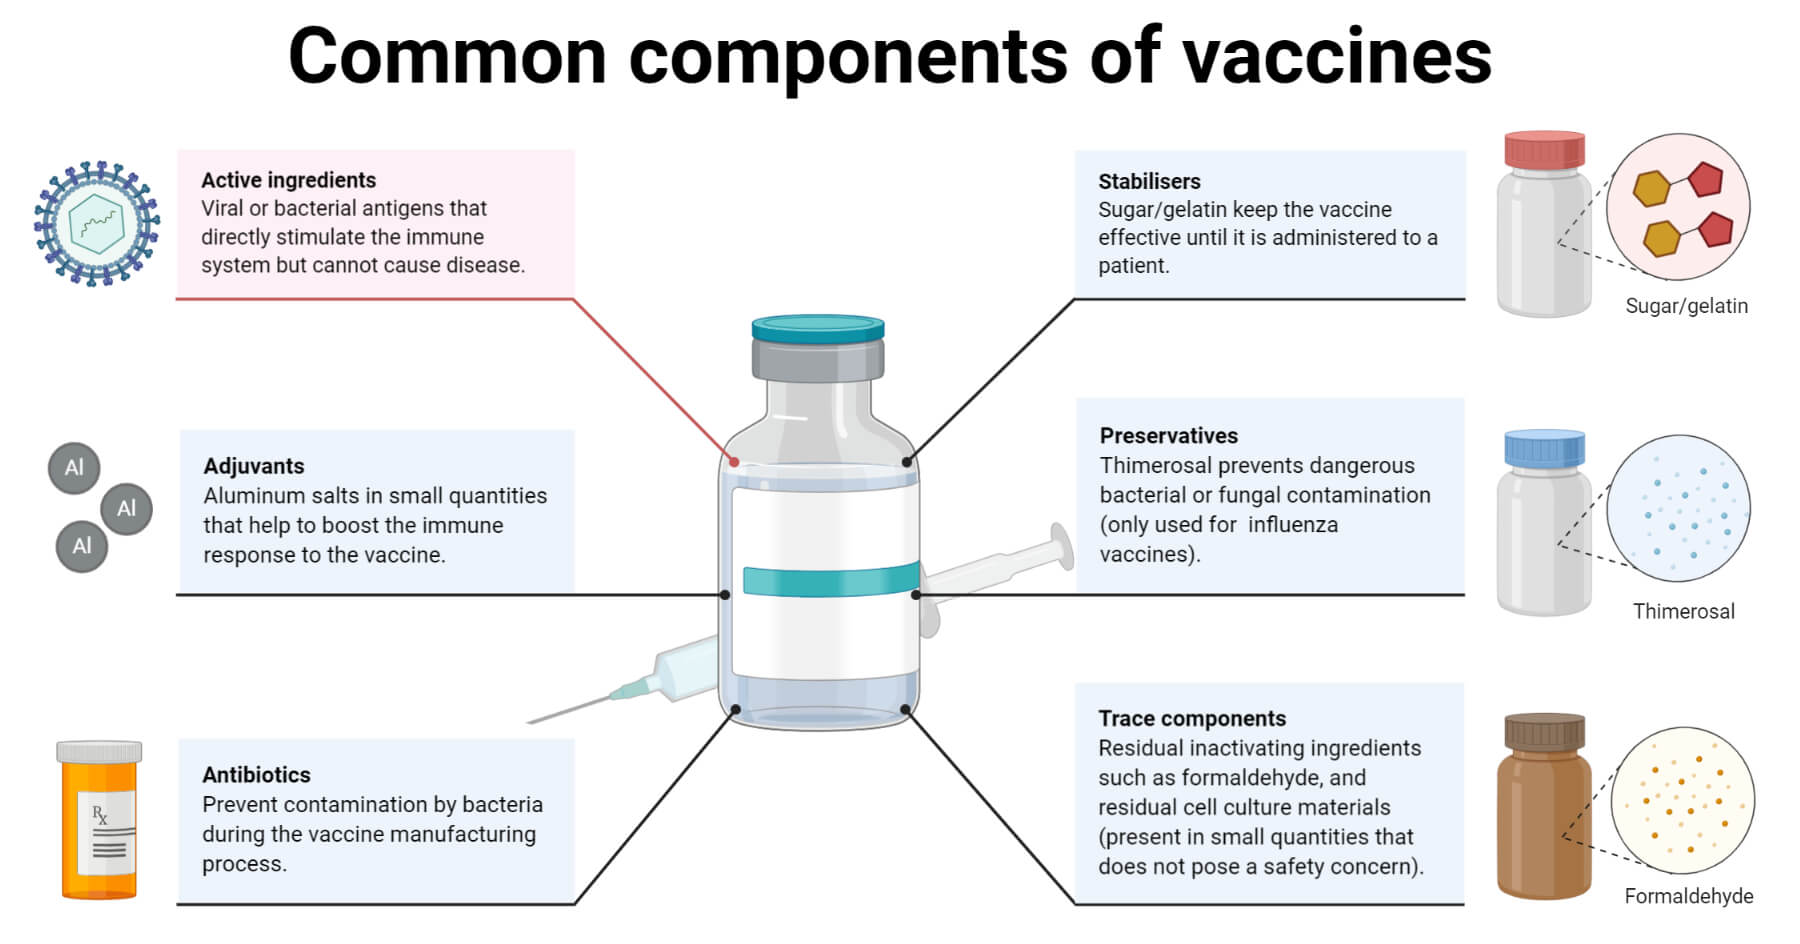 Common components of vaccines